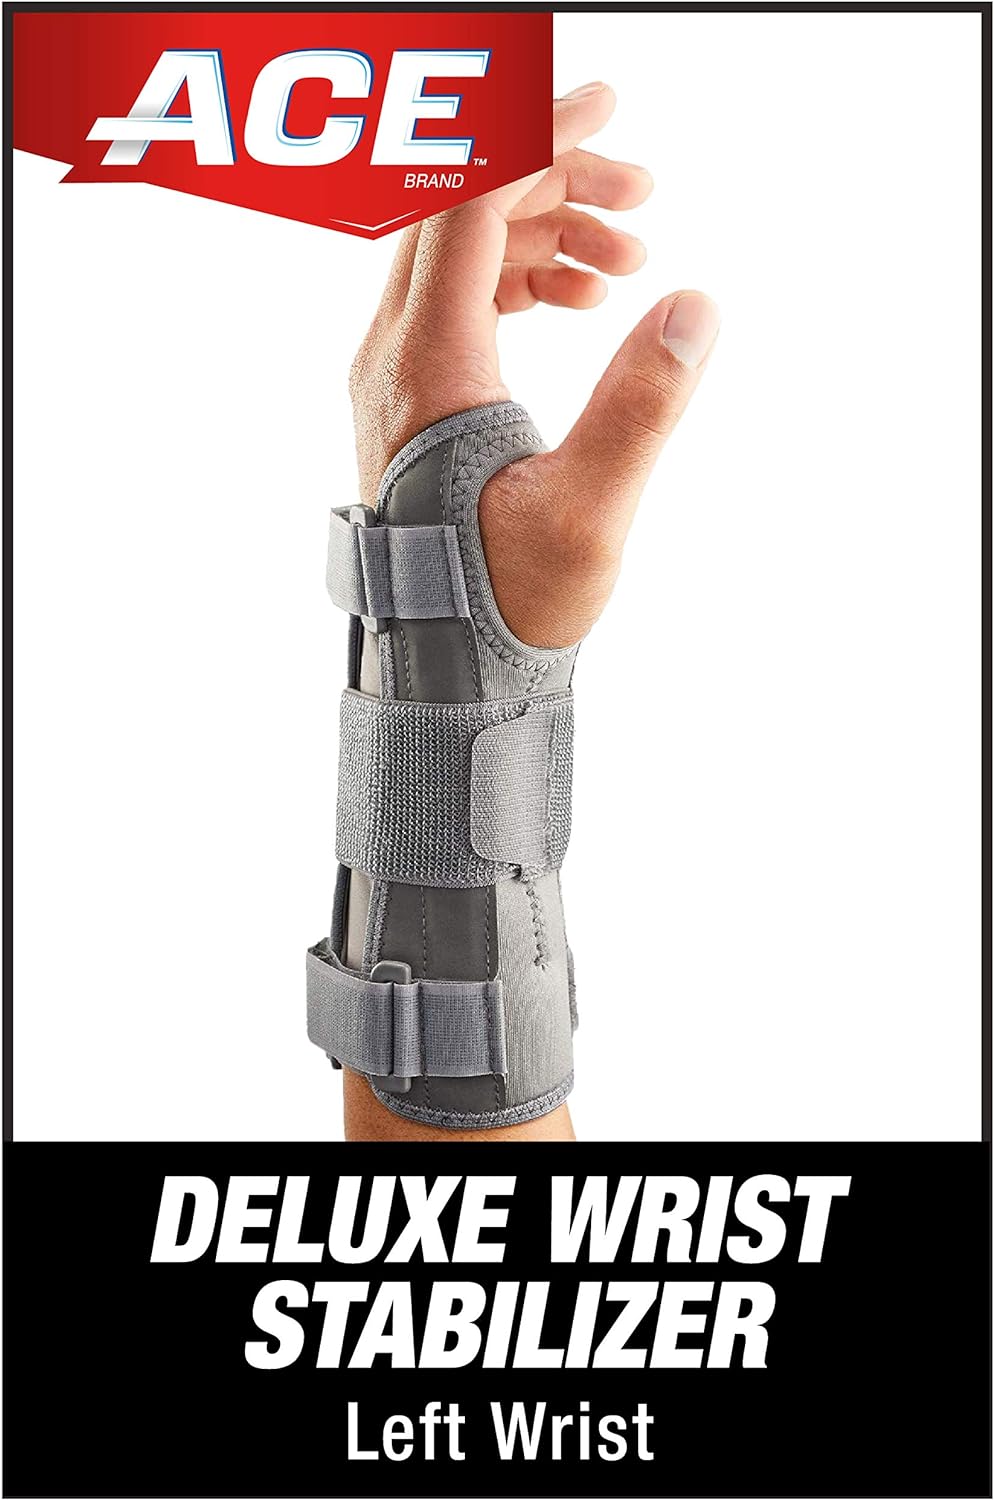 Generic ACE Deluxe Wrist Stabilizer, Left Hand, Helps Relieve Symptoms of Carpal Tunnel Syndrome, Adjustable, Stabilizing, Firm Support